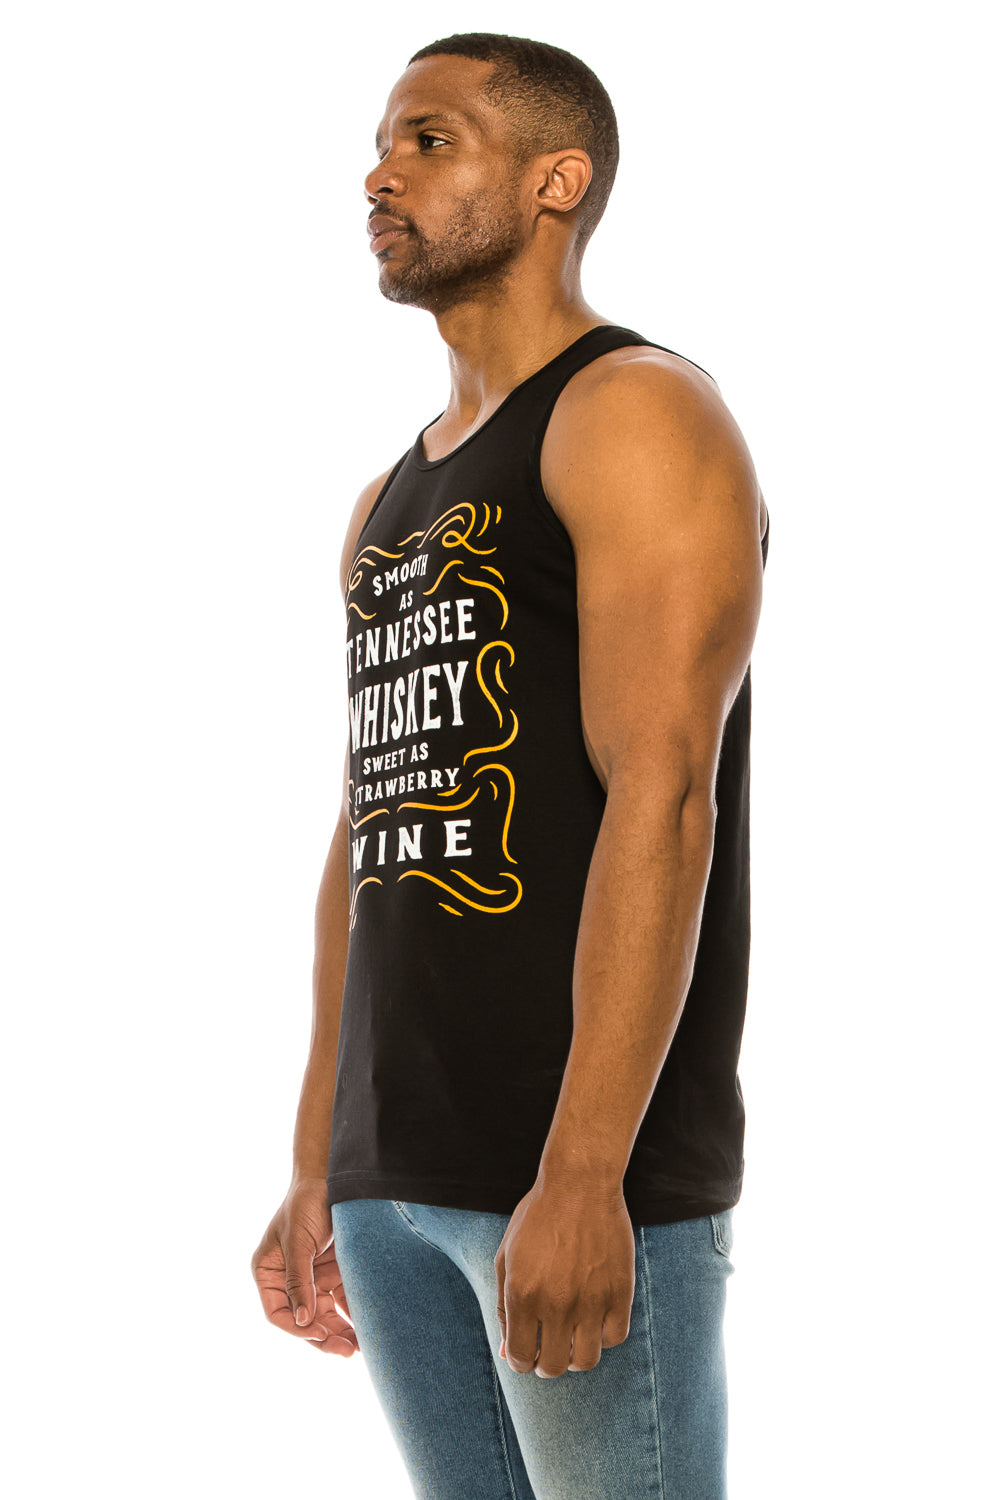 SMOOTH AS TENNESSEE WHISKEY MENS TANK - Trailsclothing.com